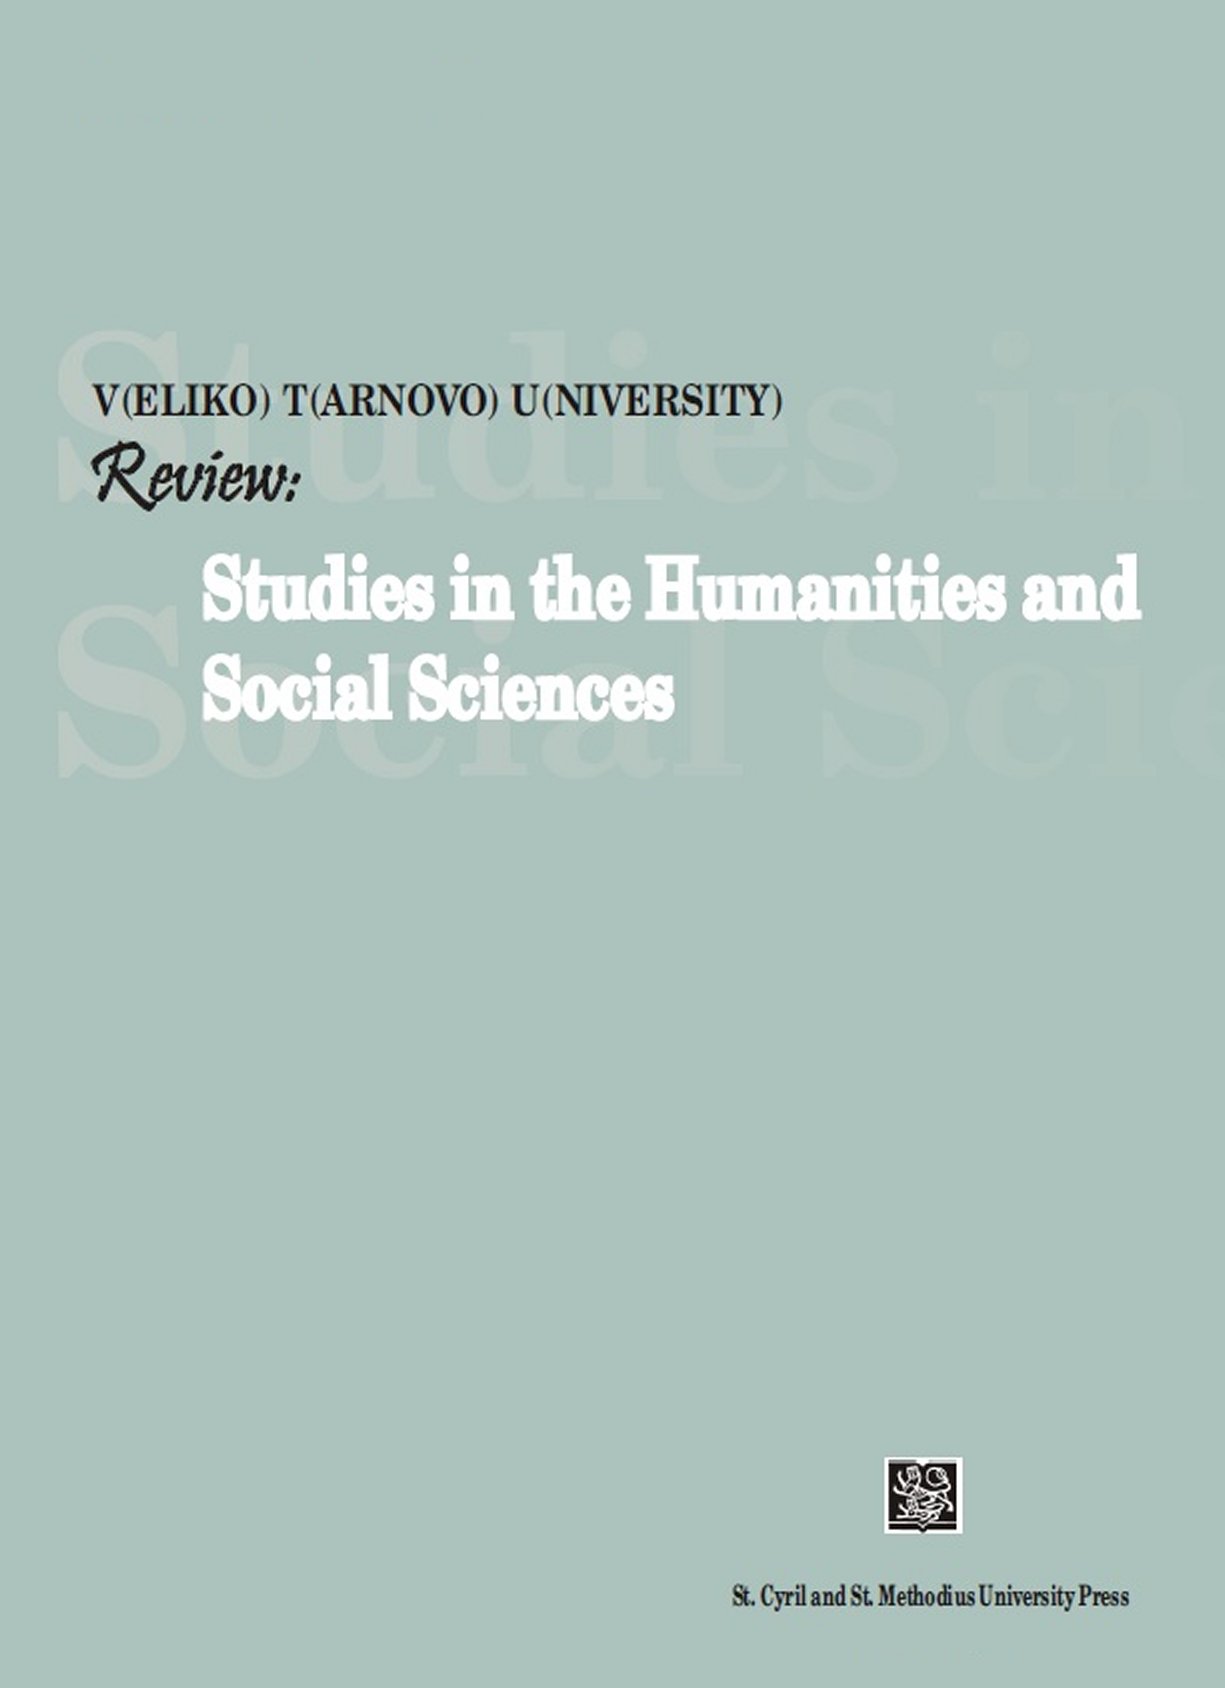 VTU Review: Studies in the Humanities and Social Sciences Cover Image